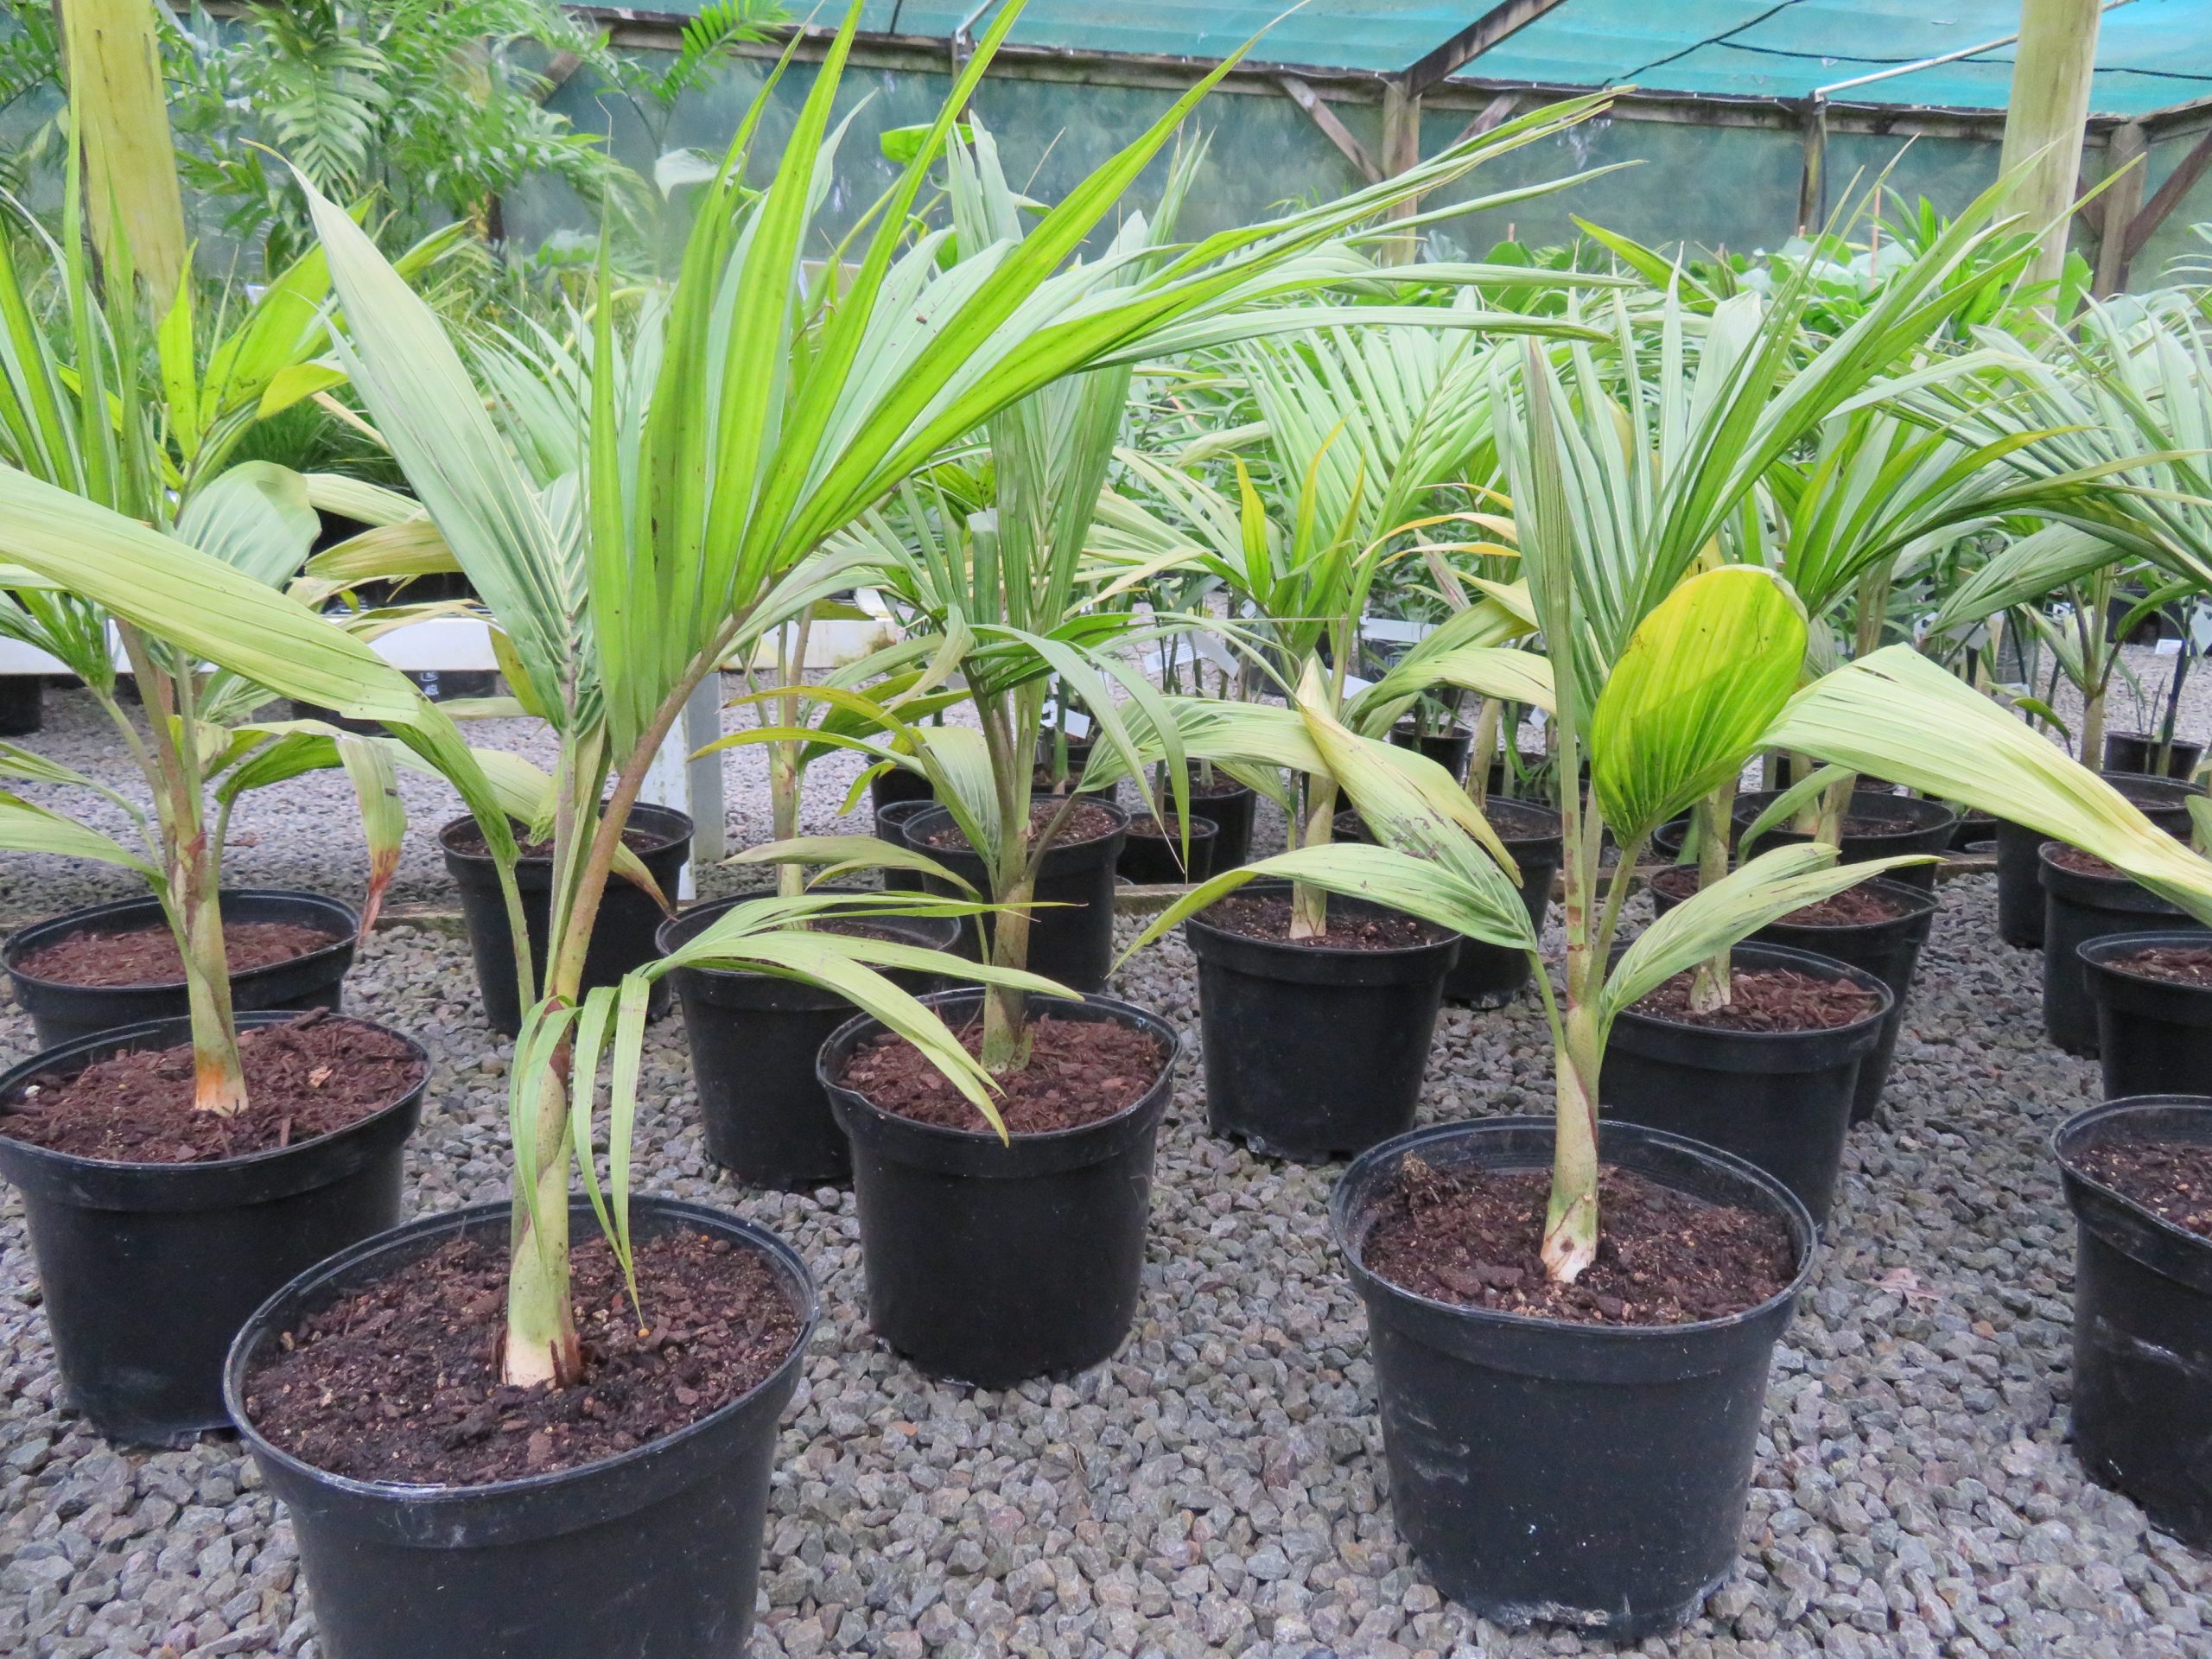 Palm leaves planted in several black plant buckets filled with soil